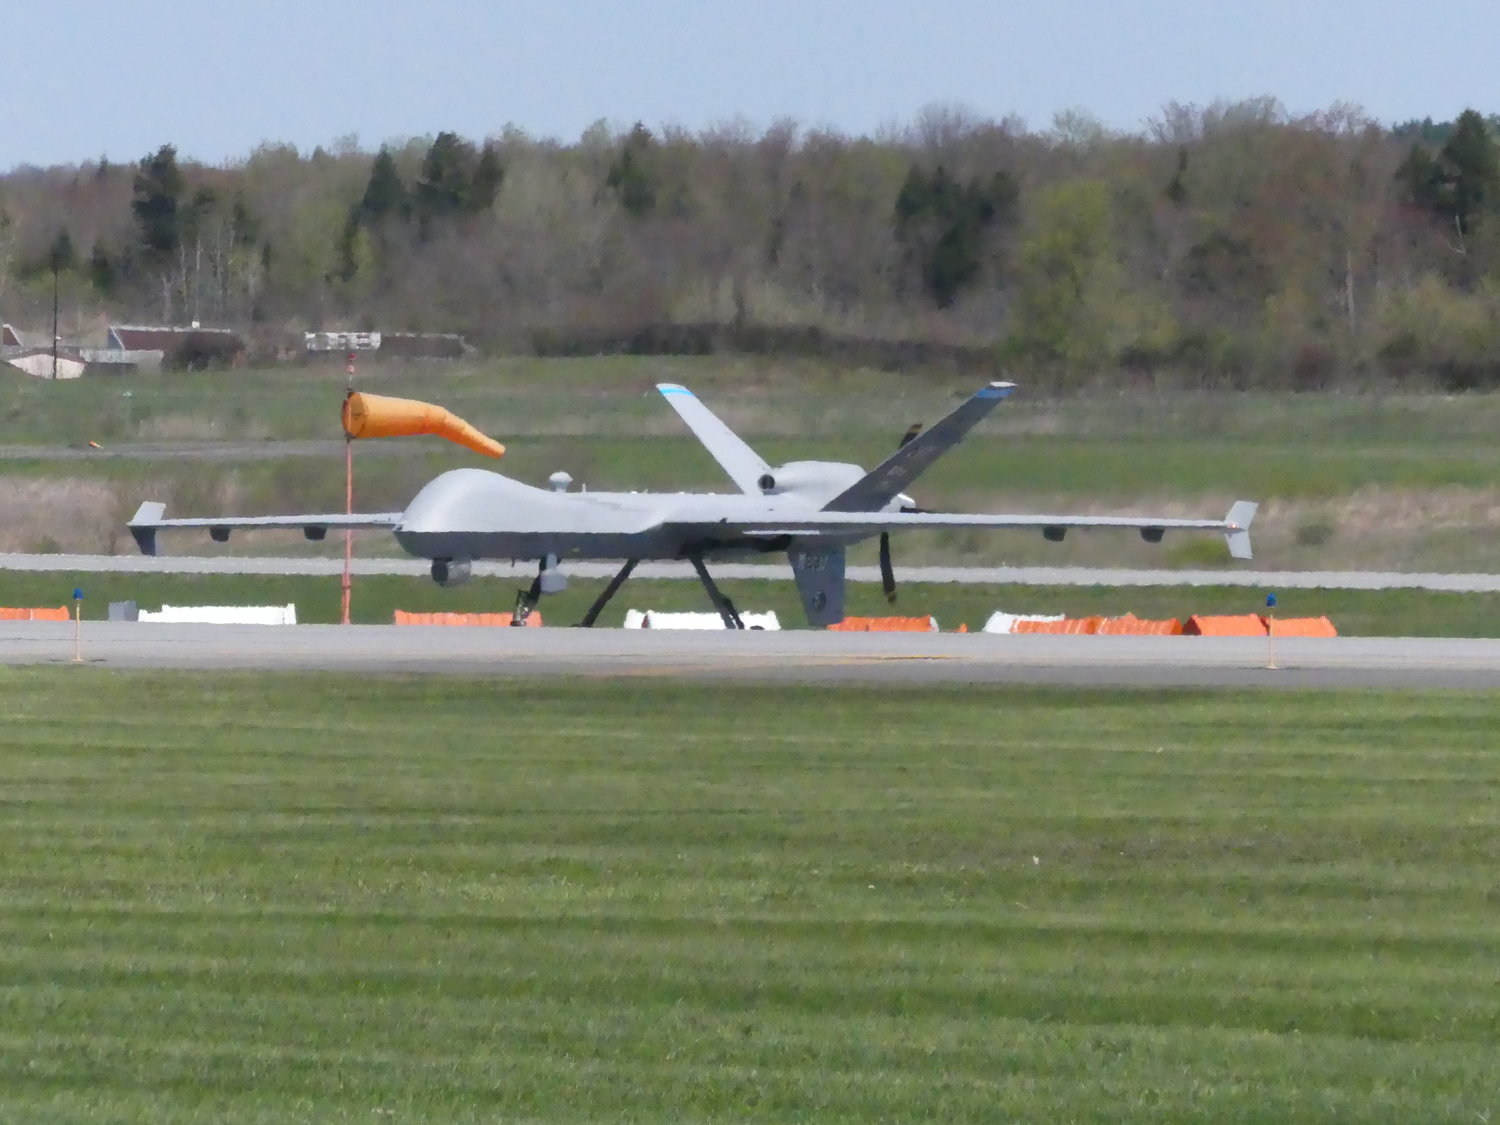 A New York Air National Guard MQ-9 Reaper remotely piloted aircraft lands on the runway under blue skies at Griffiss International Airport at Griffiss Park in Rome late Thursday morning. The landing made history, being the first time a 174th Attack Wing Reaper hit the ground on soil other than its home base at Hancock Field Air National Guard Base in Syracuse.